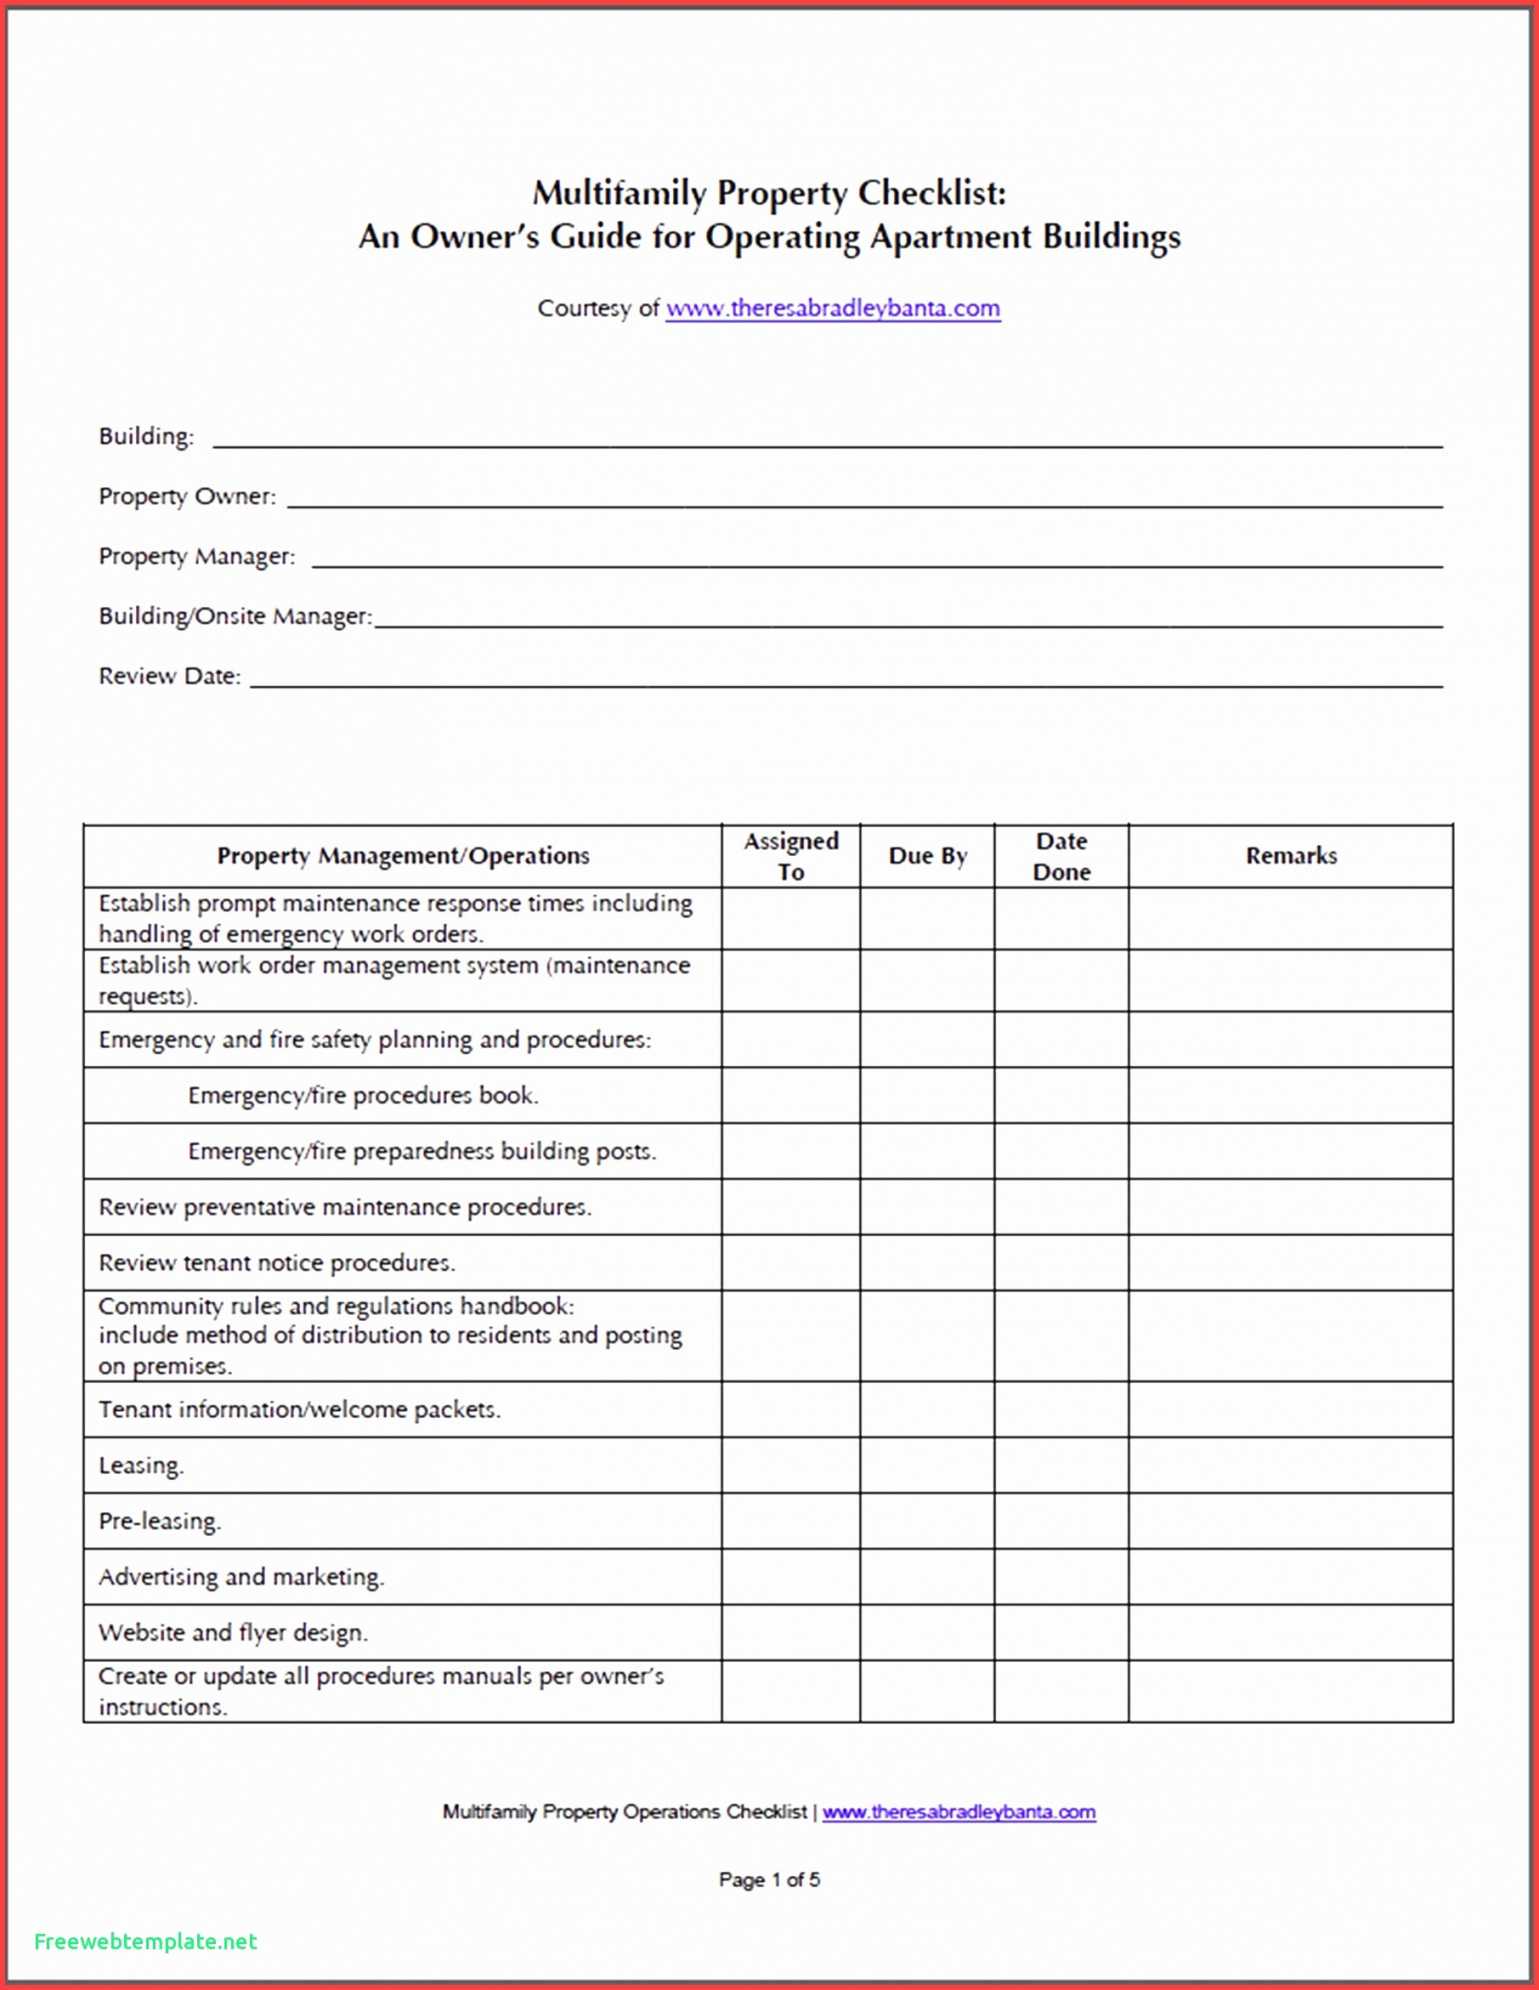 Engineering Inspection Report Template – Atlantaauctionco Pertaining To Engineering Inspection Report Template